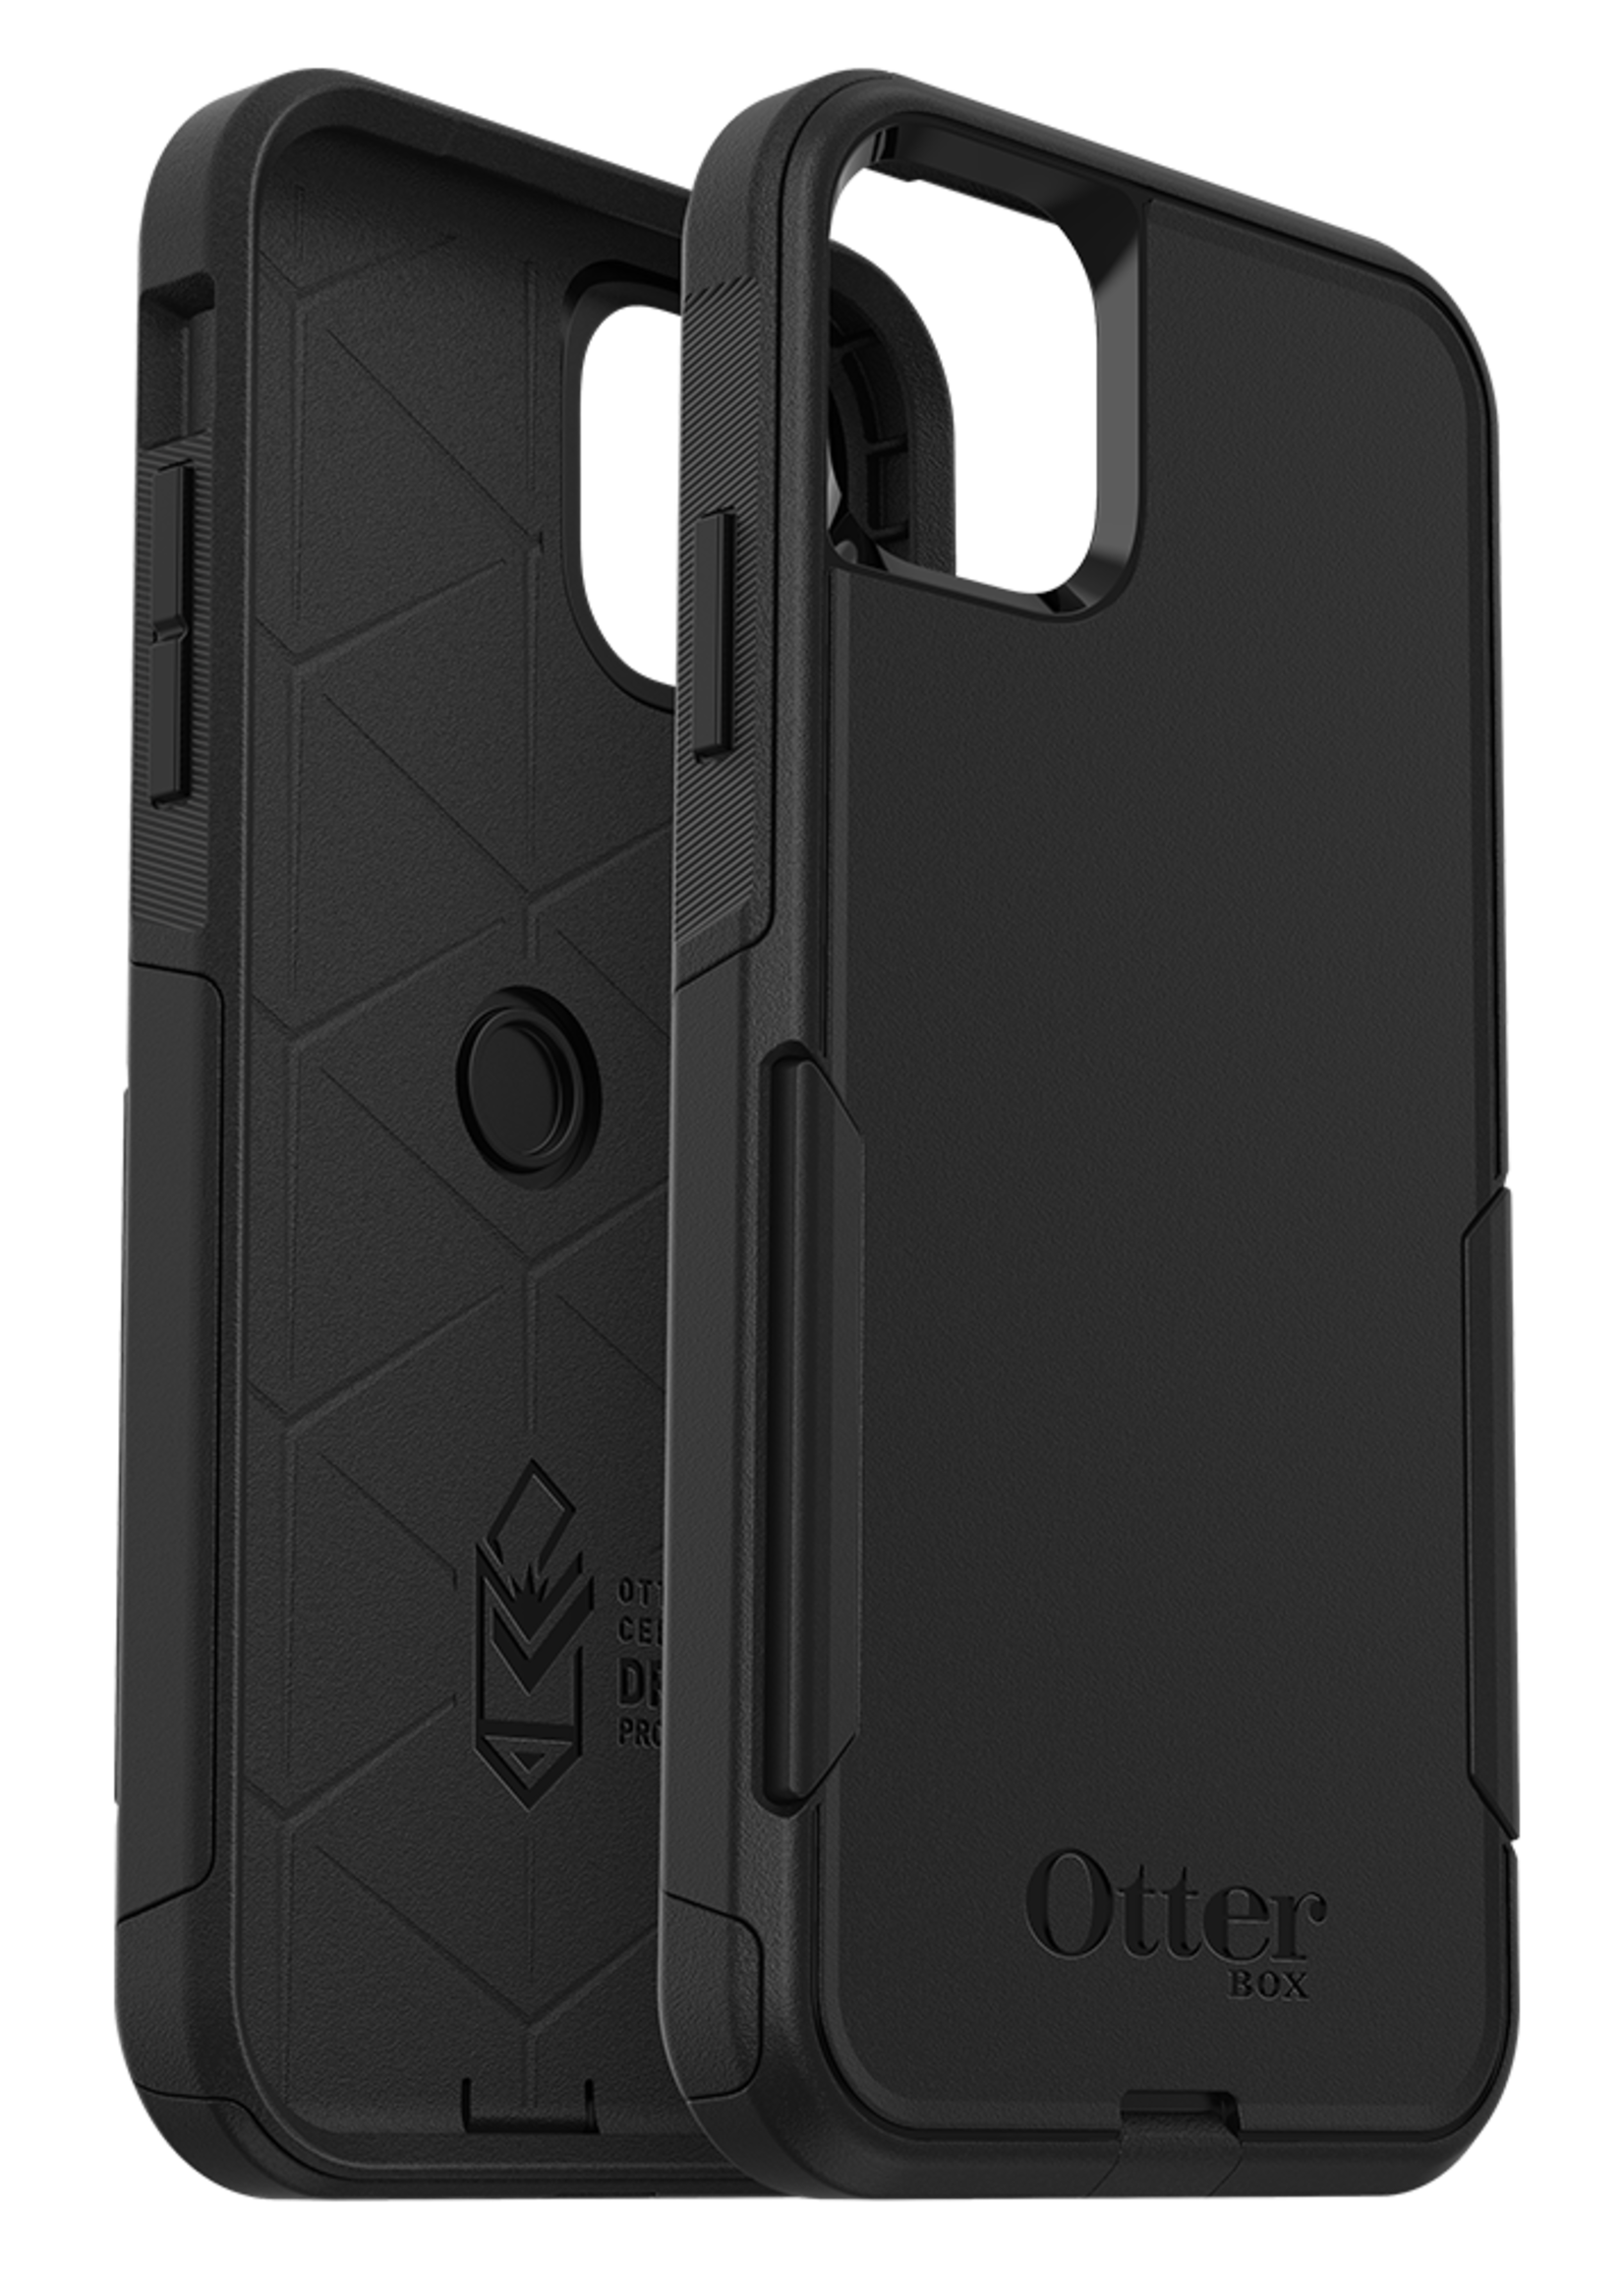 Otterbox OtterBox - Commuter Case for Apple iPhone 11 - Black